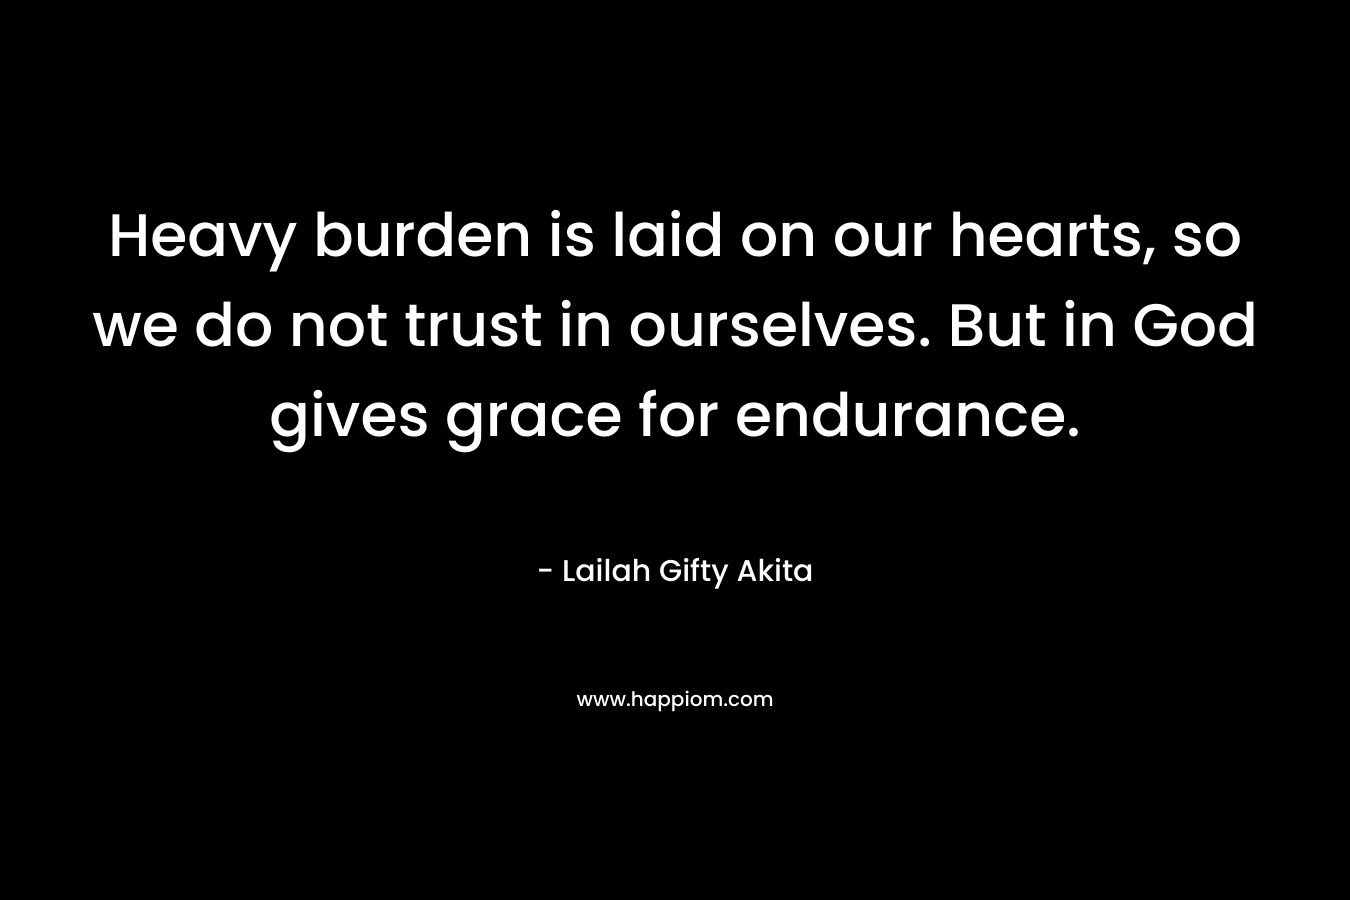 Heavy burden is laid on our hearts, so we do not trust in ourselves. But in God gives grace for endurance.